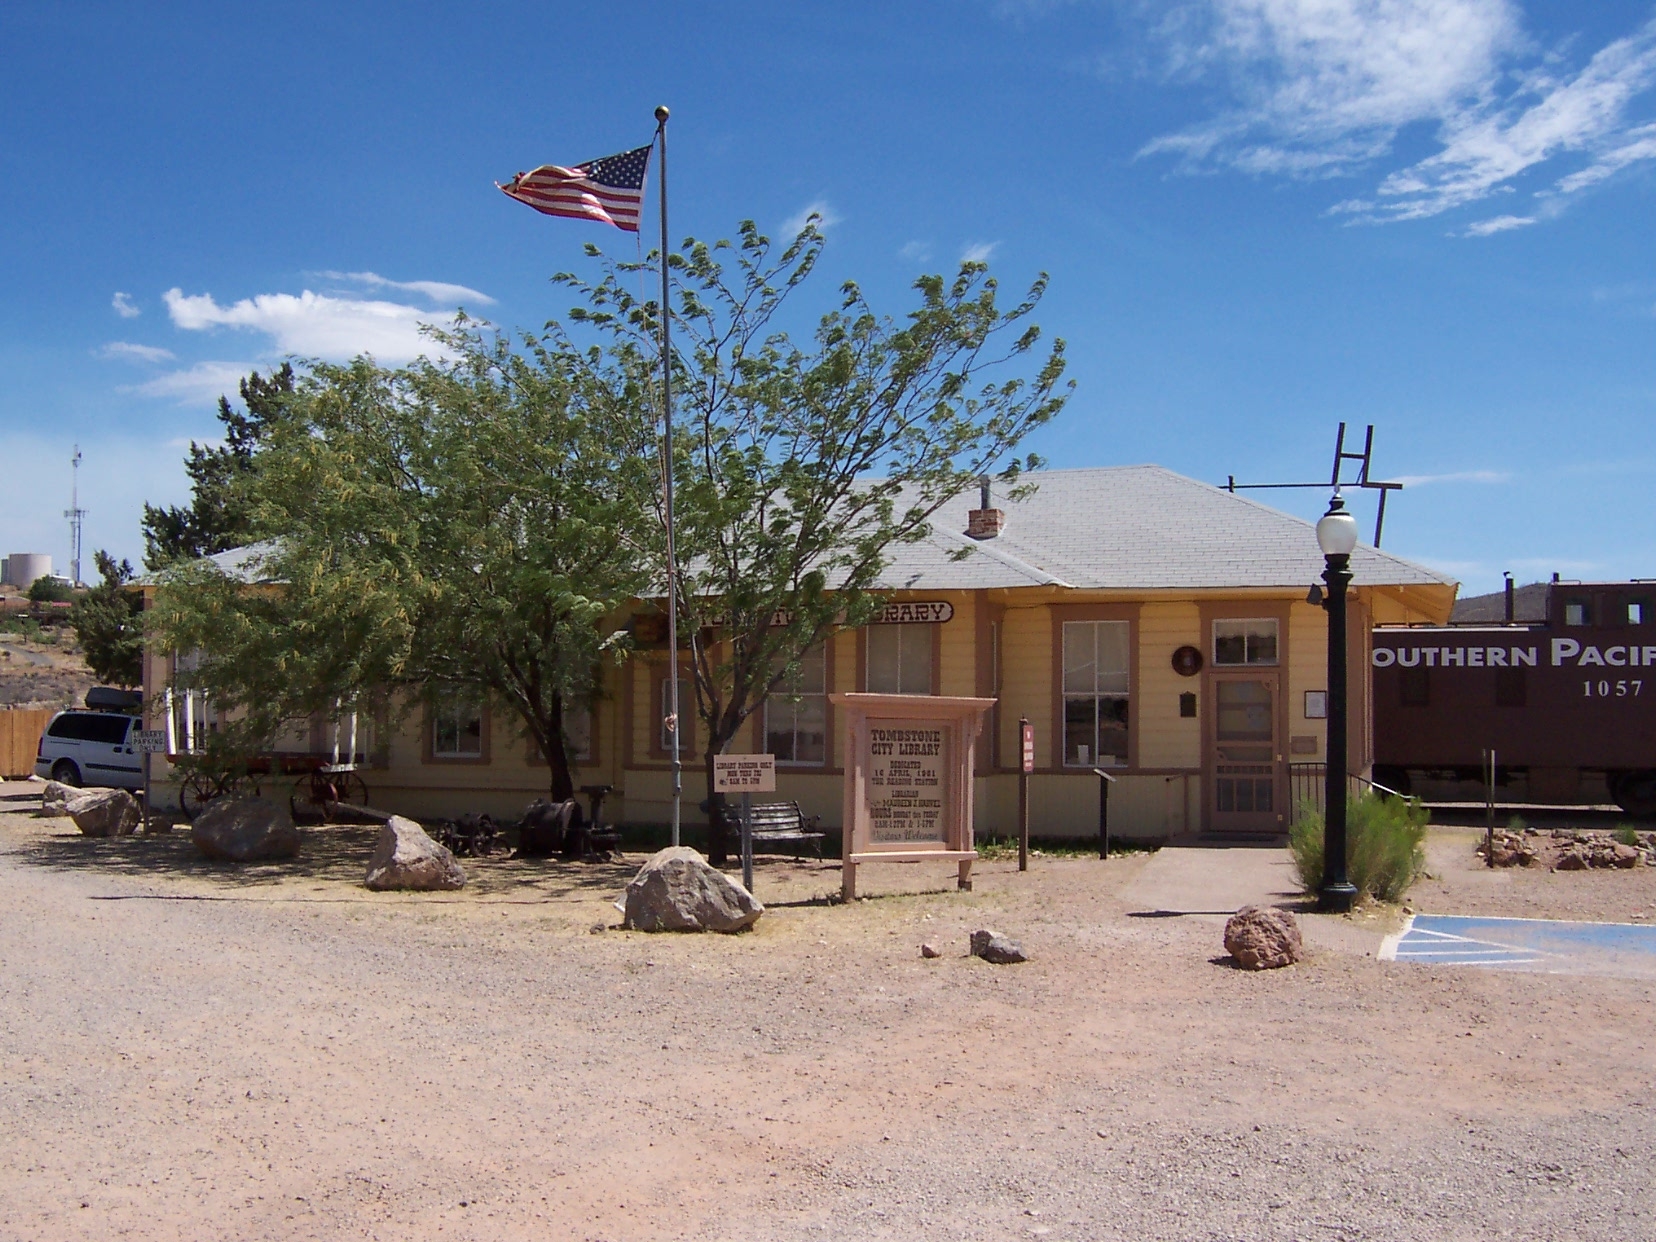 Southern Pacific Train Depot and Marker